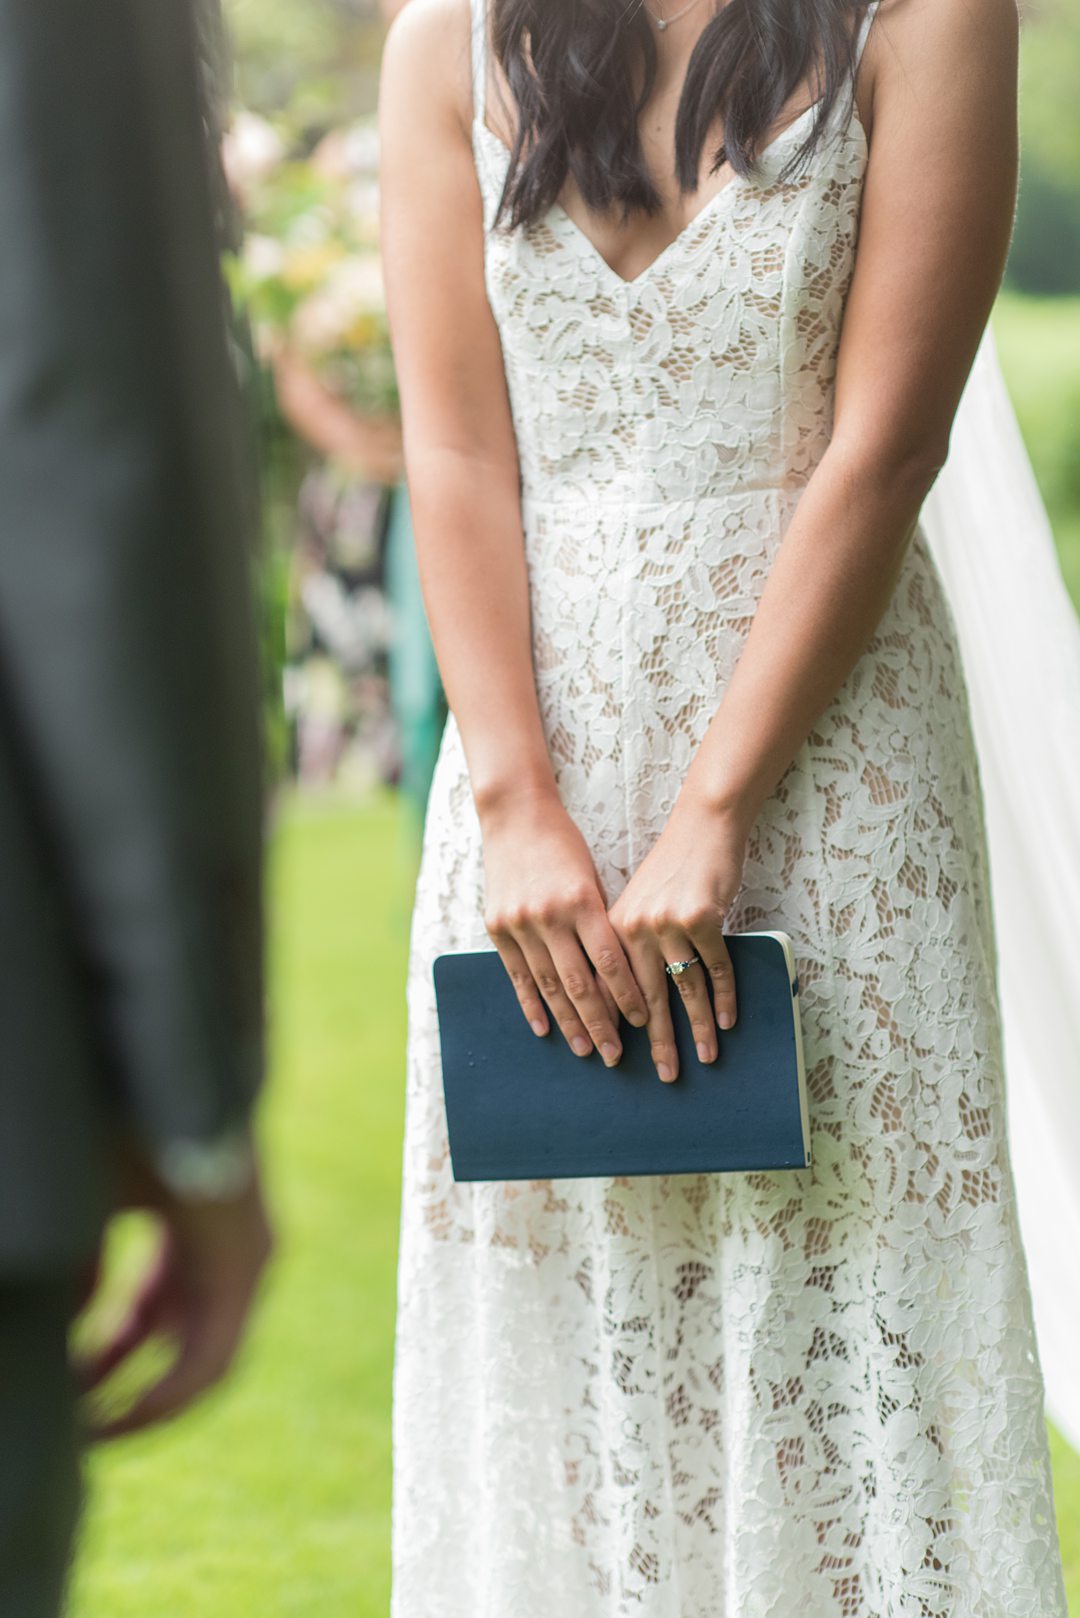 The bride wrote her own vows for her small outdoor wedding ceremony in a flower-filled park in Raleigh, NC captured by Mikkel Paige Photography. #mikkelpaige #raleighweddings #smallwedding #ncelopement